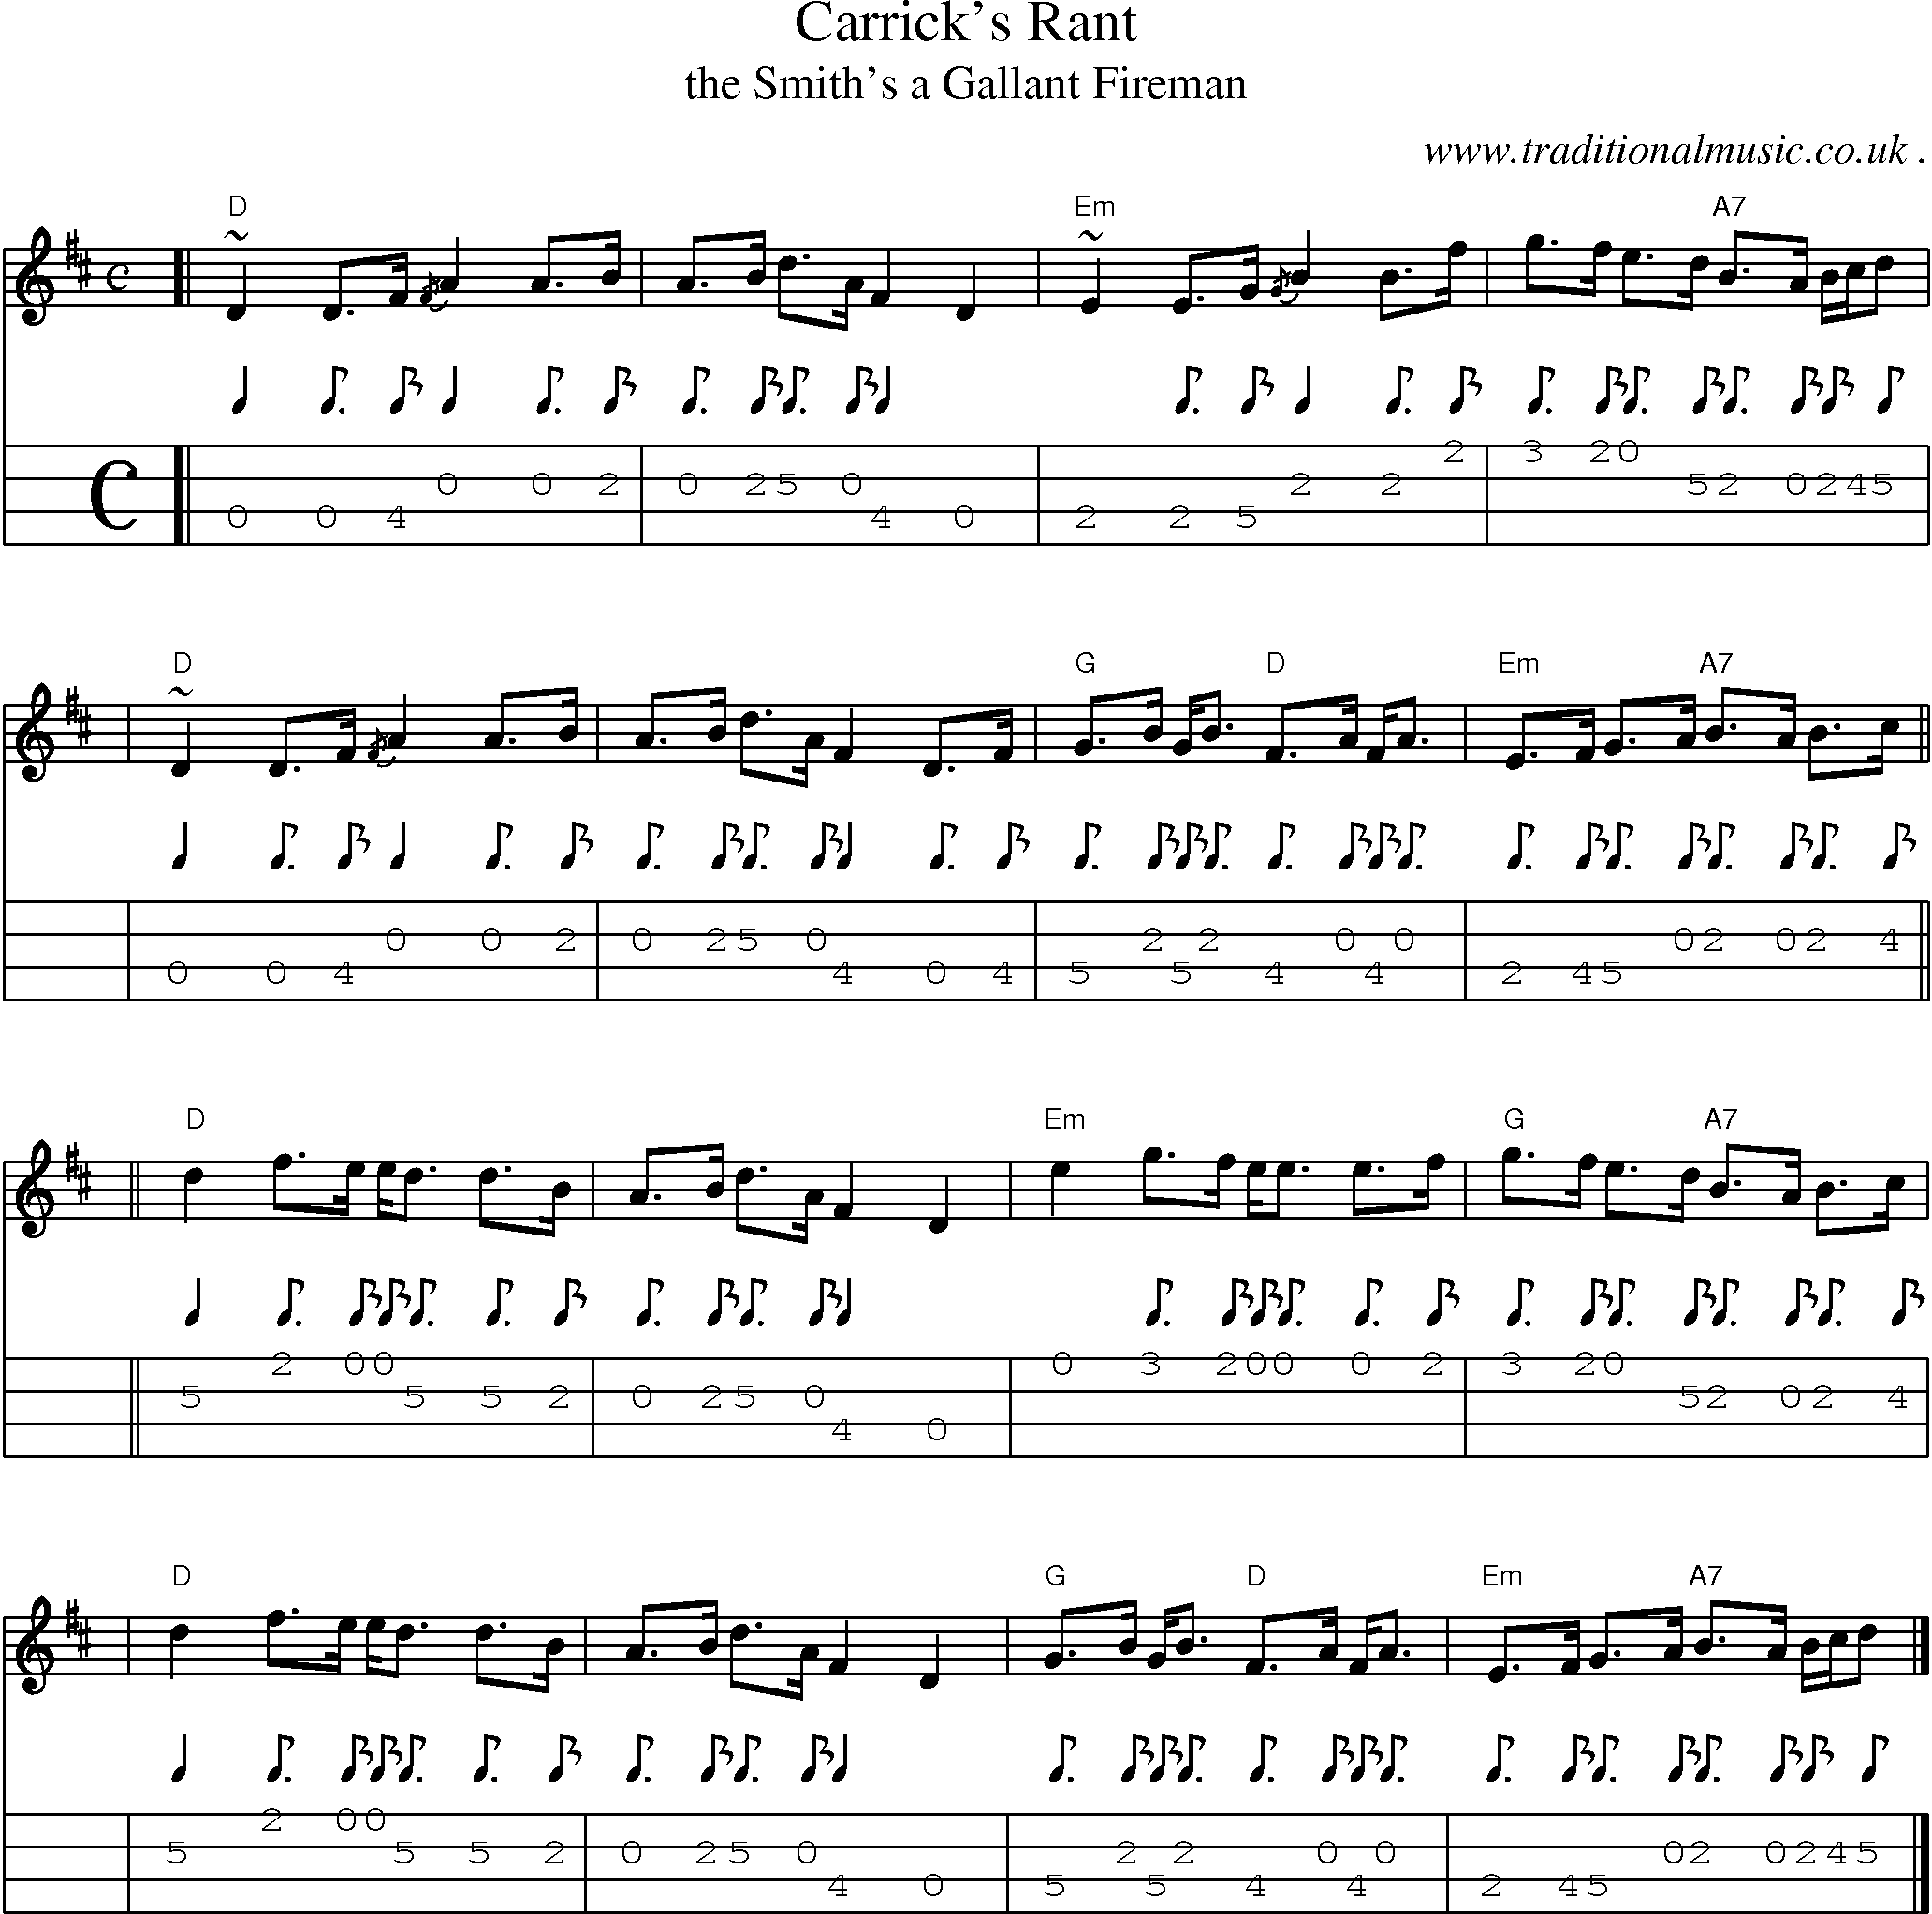 Sheet-music  score, Chords and Mandolin Tabs for Carricks Rant